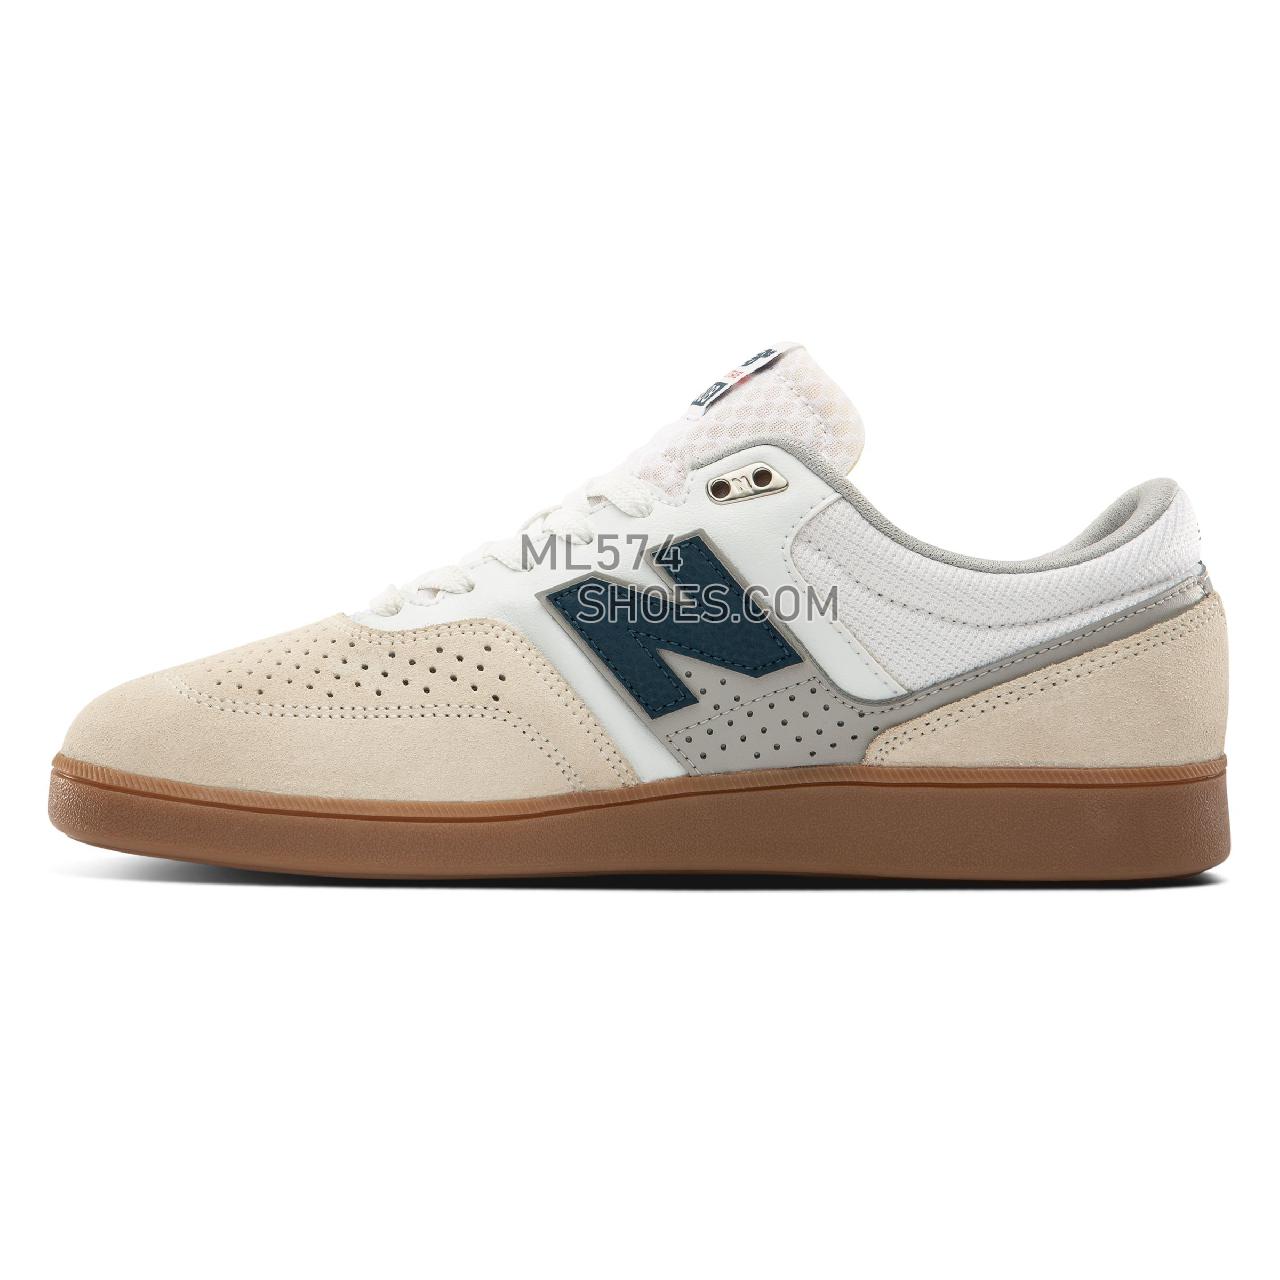 New Balance Numeric NM508 - Men's NB Numeric Skate - White with Blue and Grey - NM508WHB